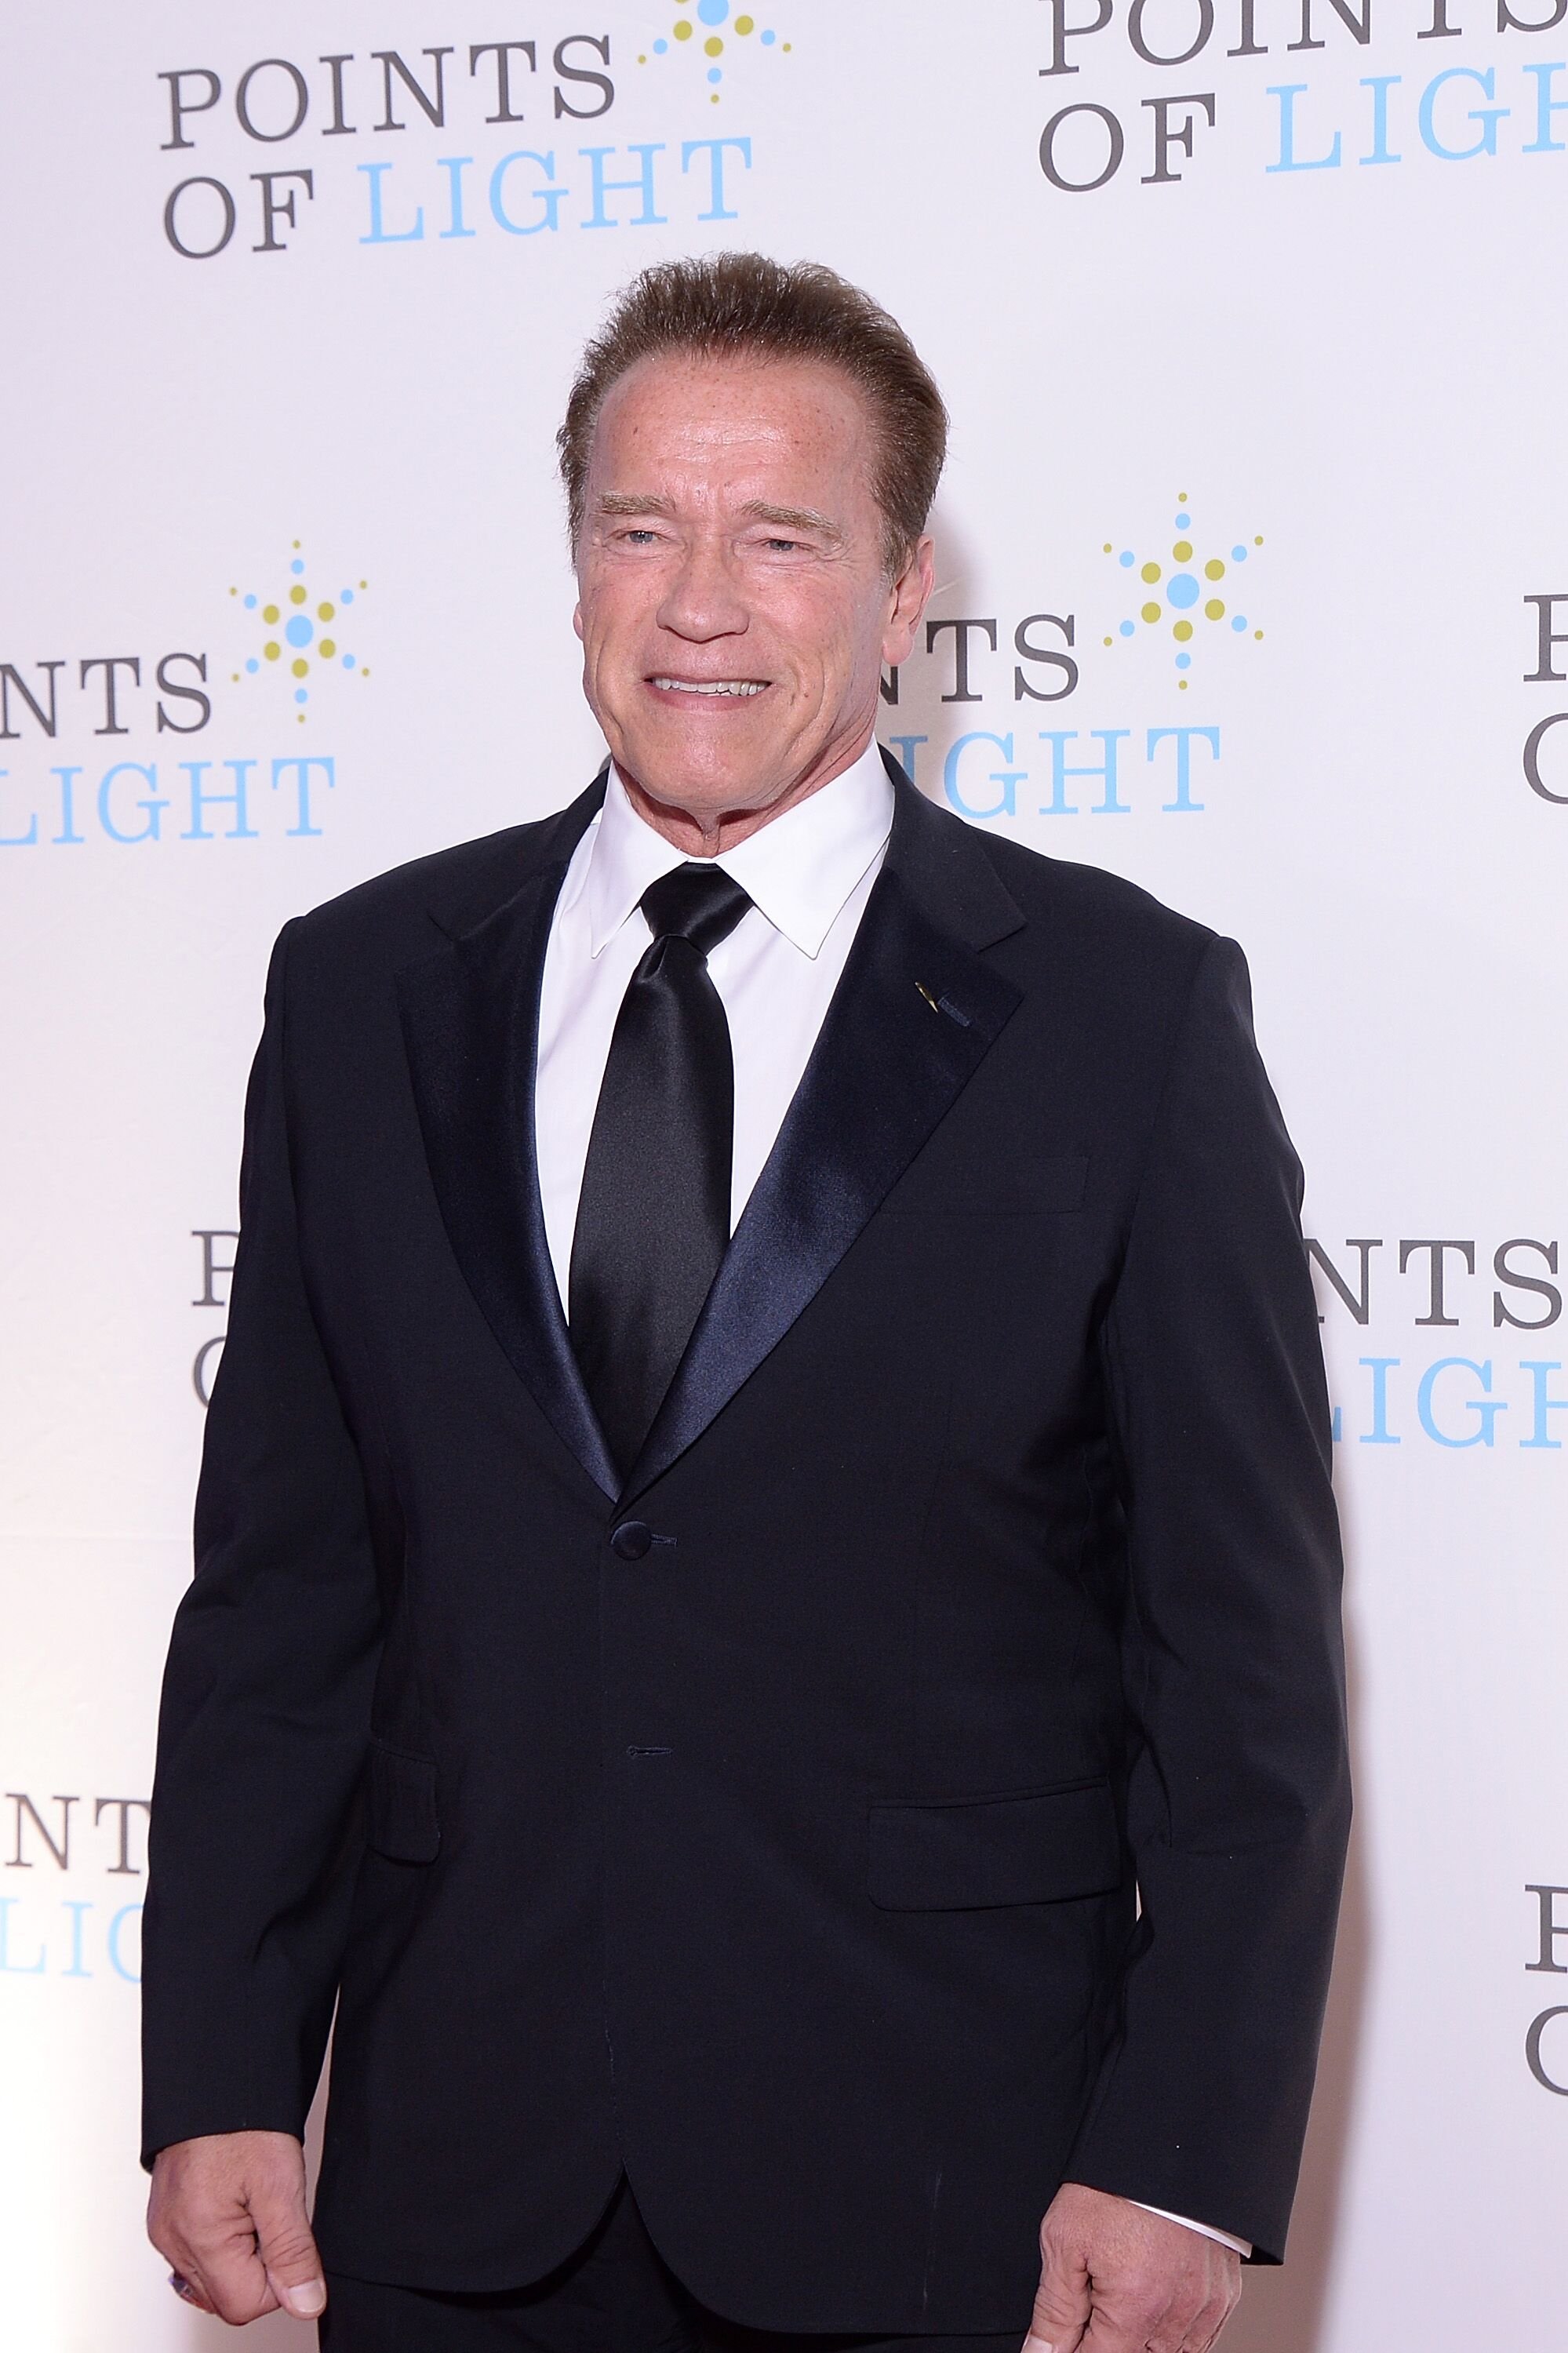 Arnold Schwarzenegger at the Points of Light event. | Source: Getty Images